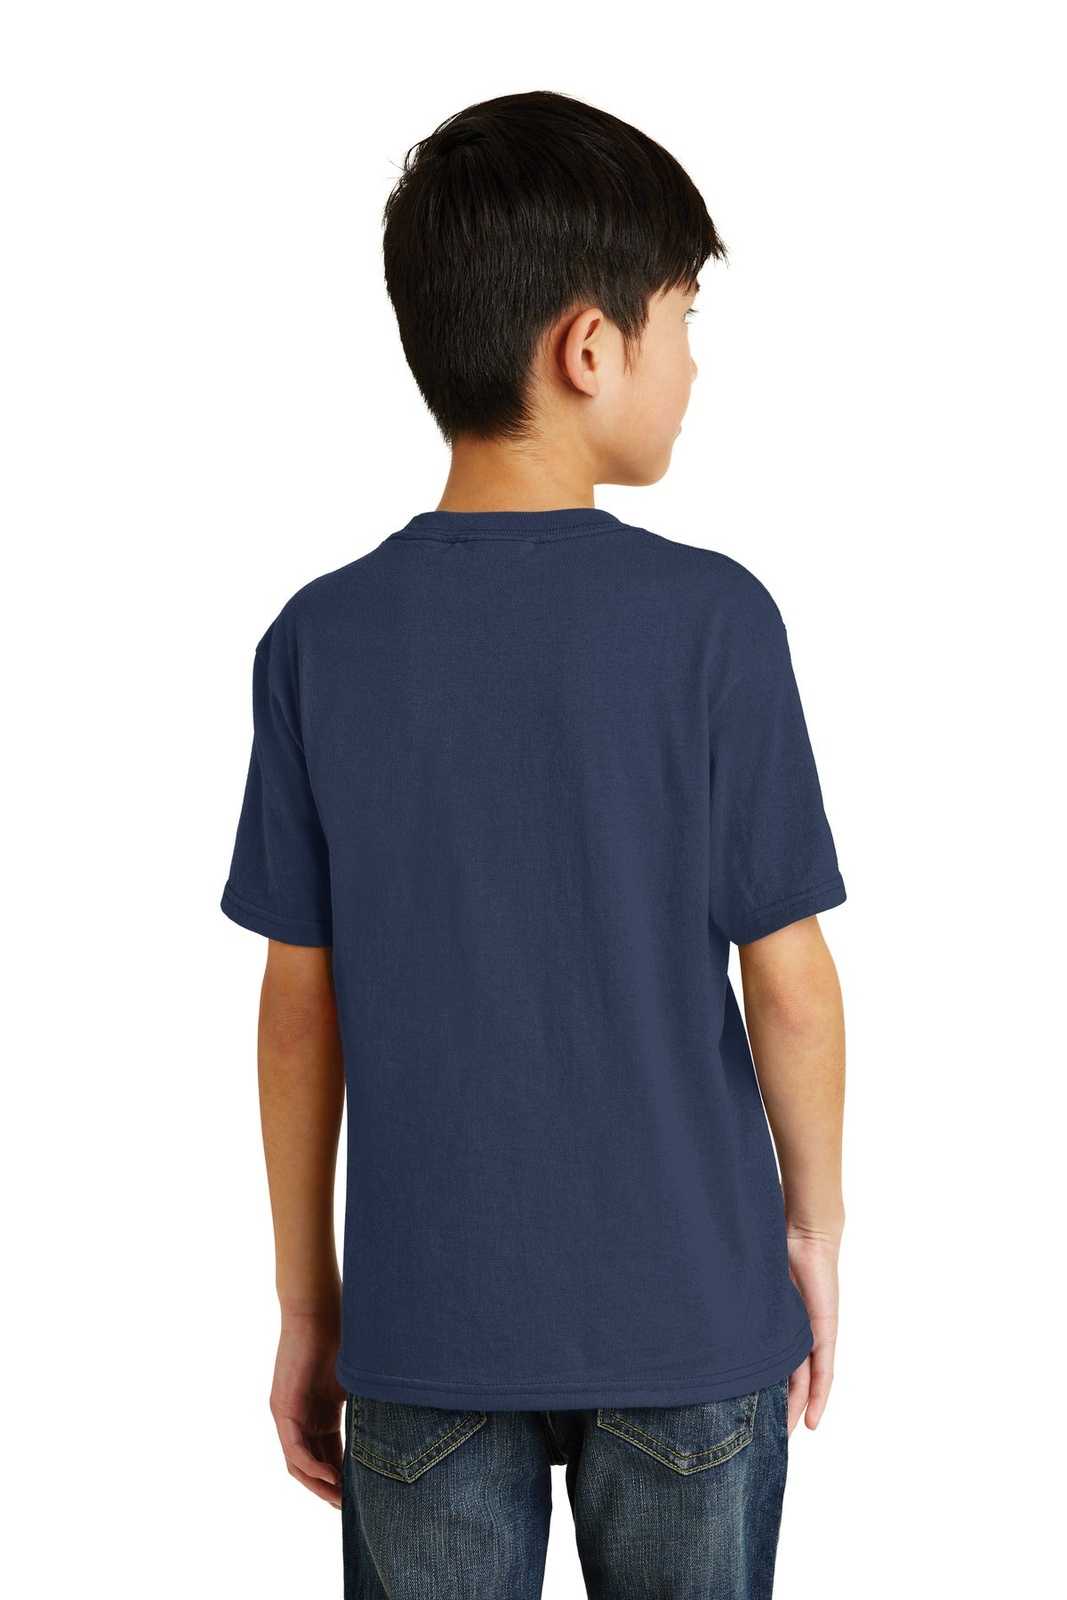 Port & Company PC55Y Youth Core Blend Tee - Navy - HIT a Double - 1